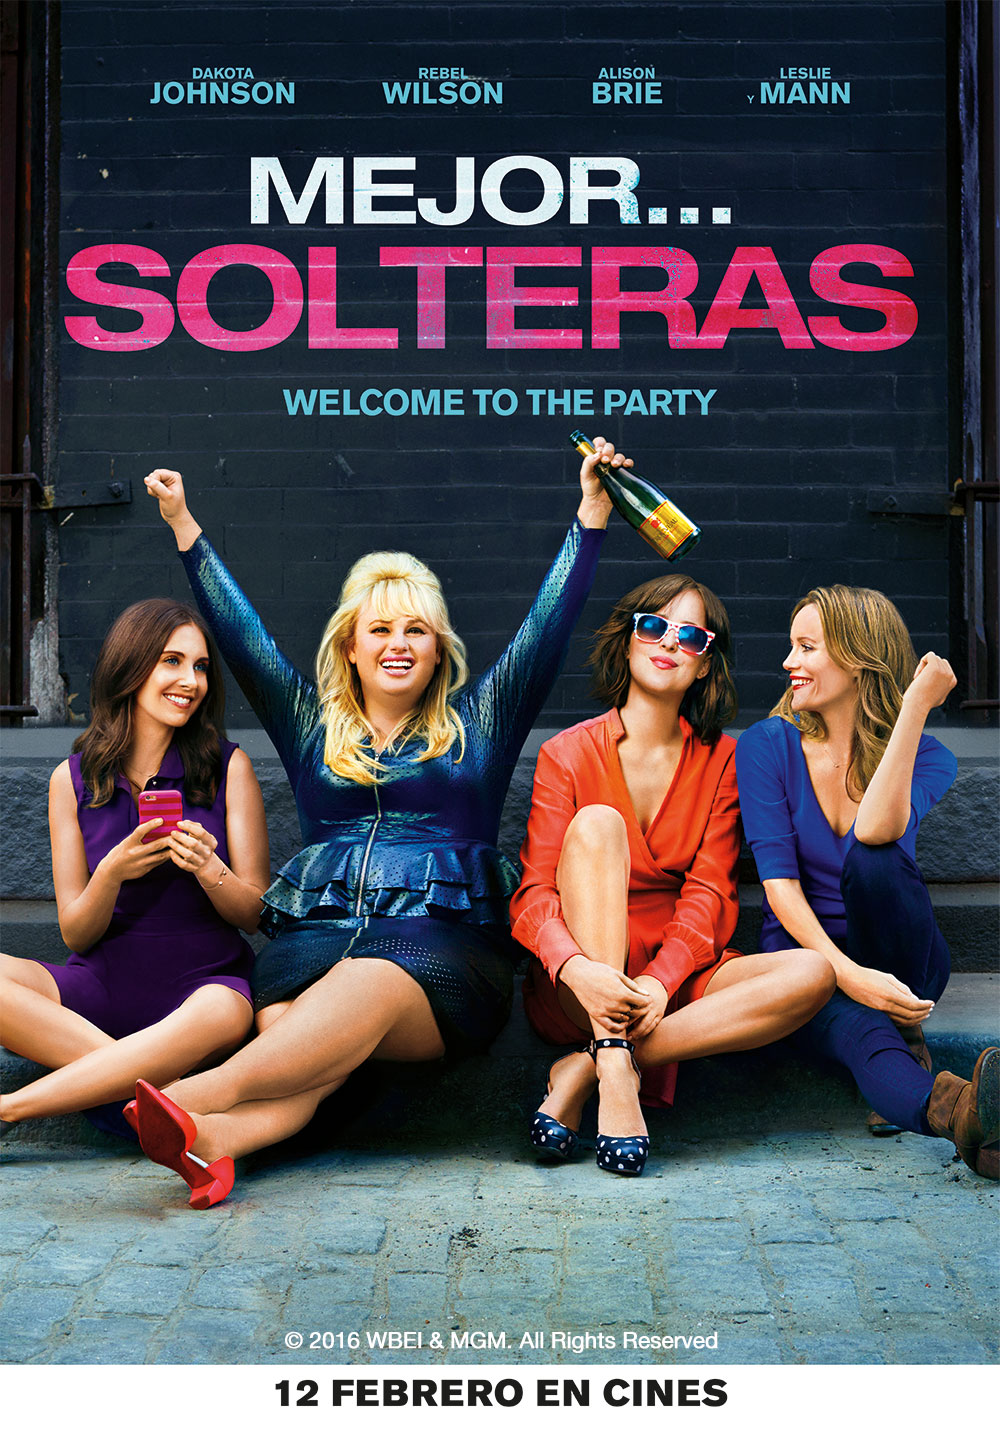 ONE-SHEET-MEJOR-SOLTERAS-3rd-party-01.jpg